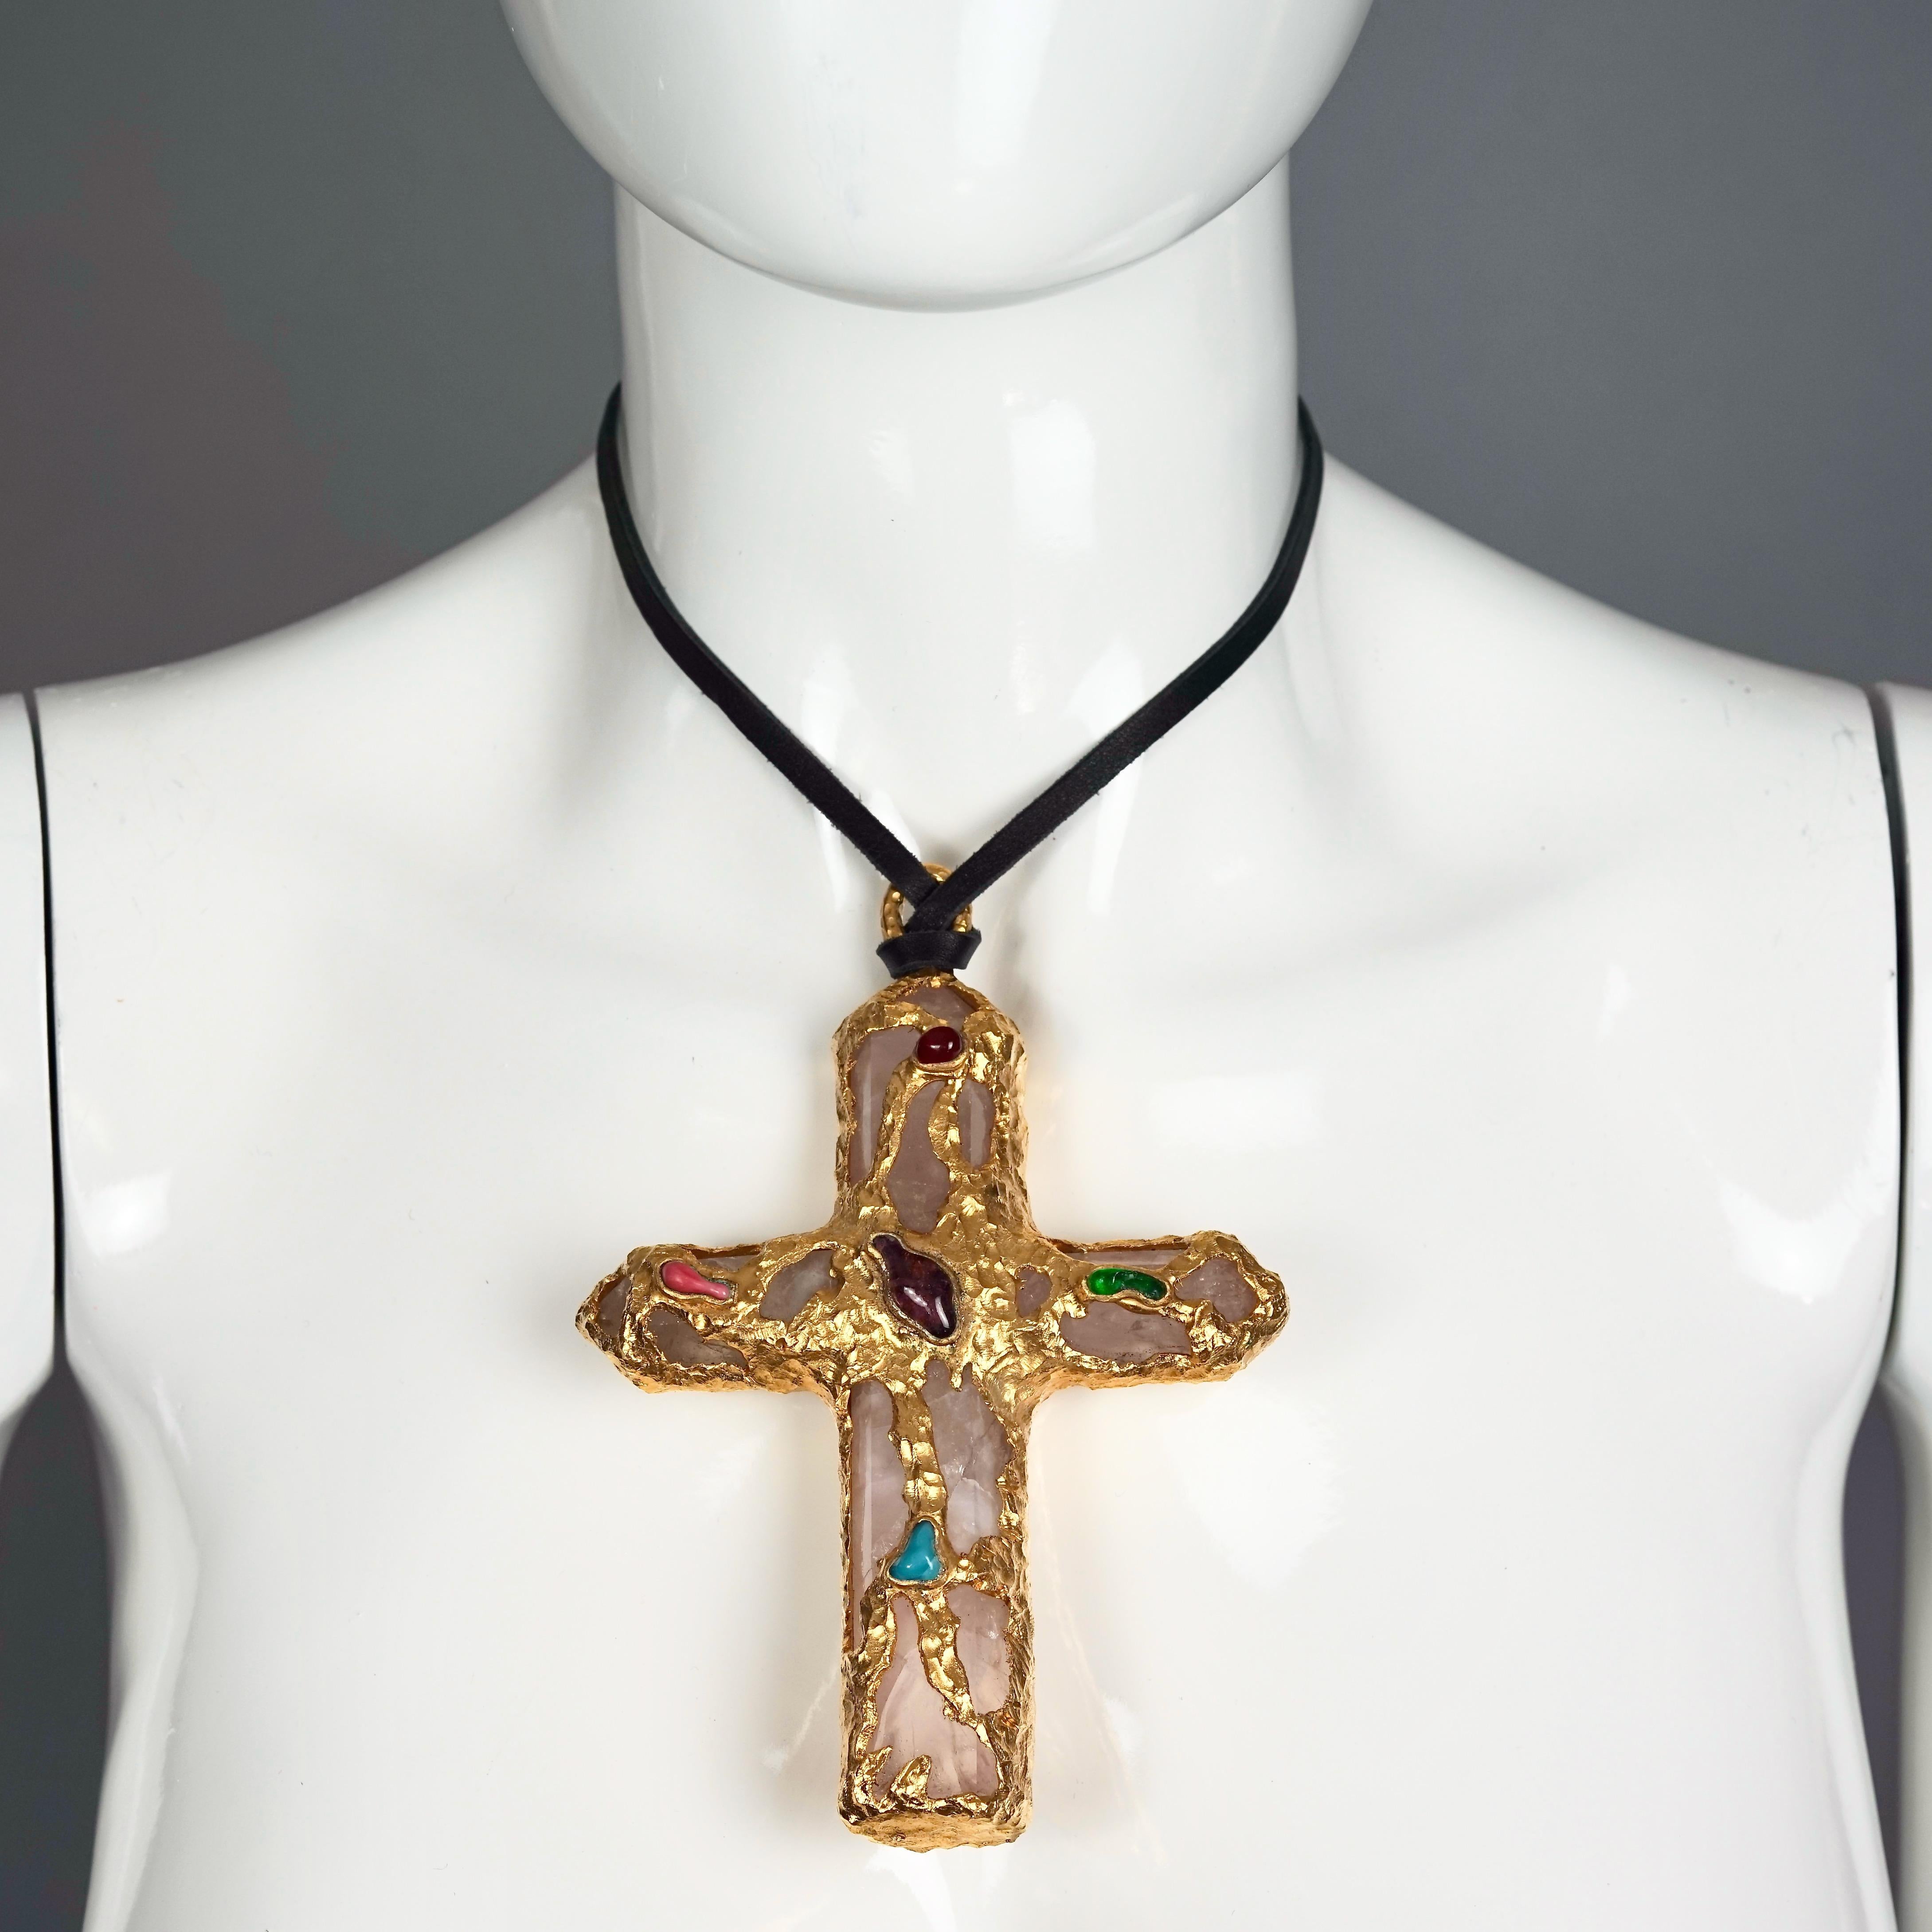 You are looking at an important Chanel cross pendant necklace designed by the legendary Robert Goossens. Rock crystal is one of the preference material of Robert Goossens in his creations. An investment worthy and a piece of